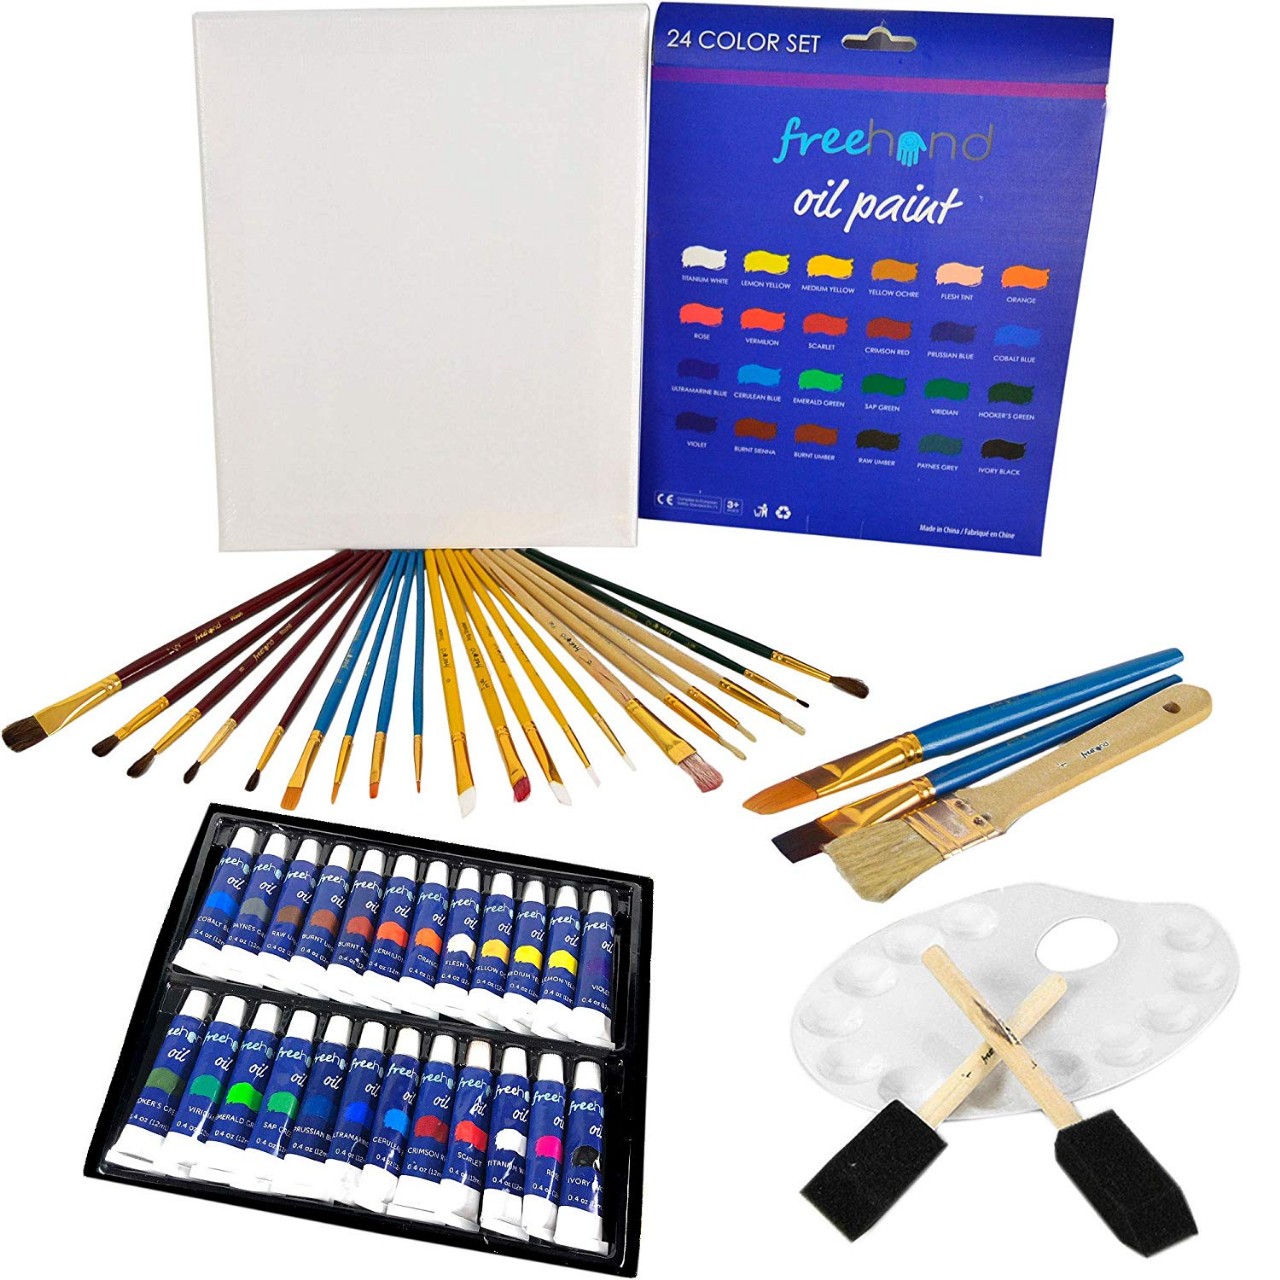 XXL Oil Paint Set - 24 Paints, 25 Brushes, 1 Canvas, and Art Palette - Oil Painting Supplies for Kid